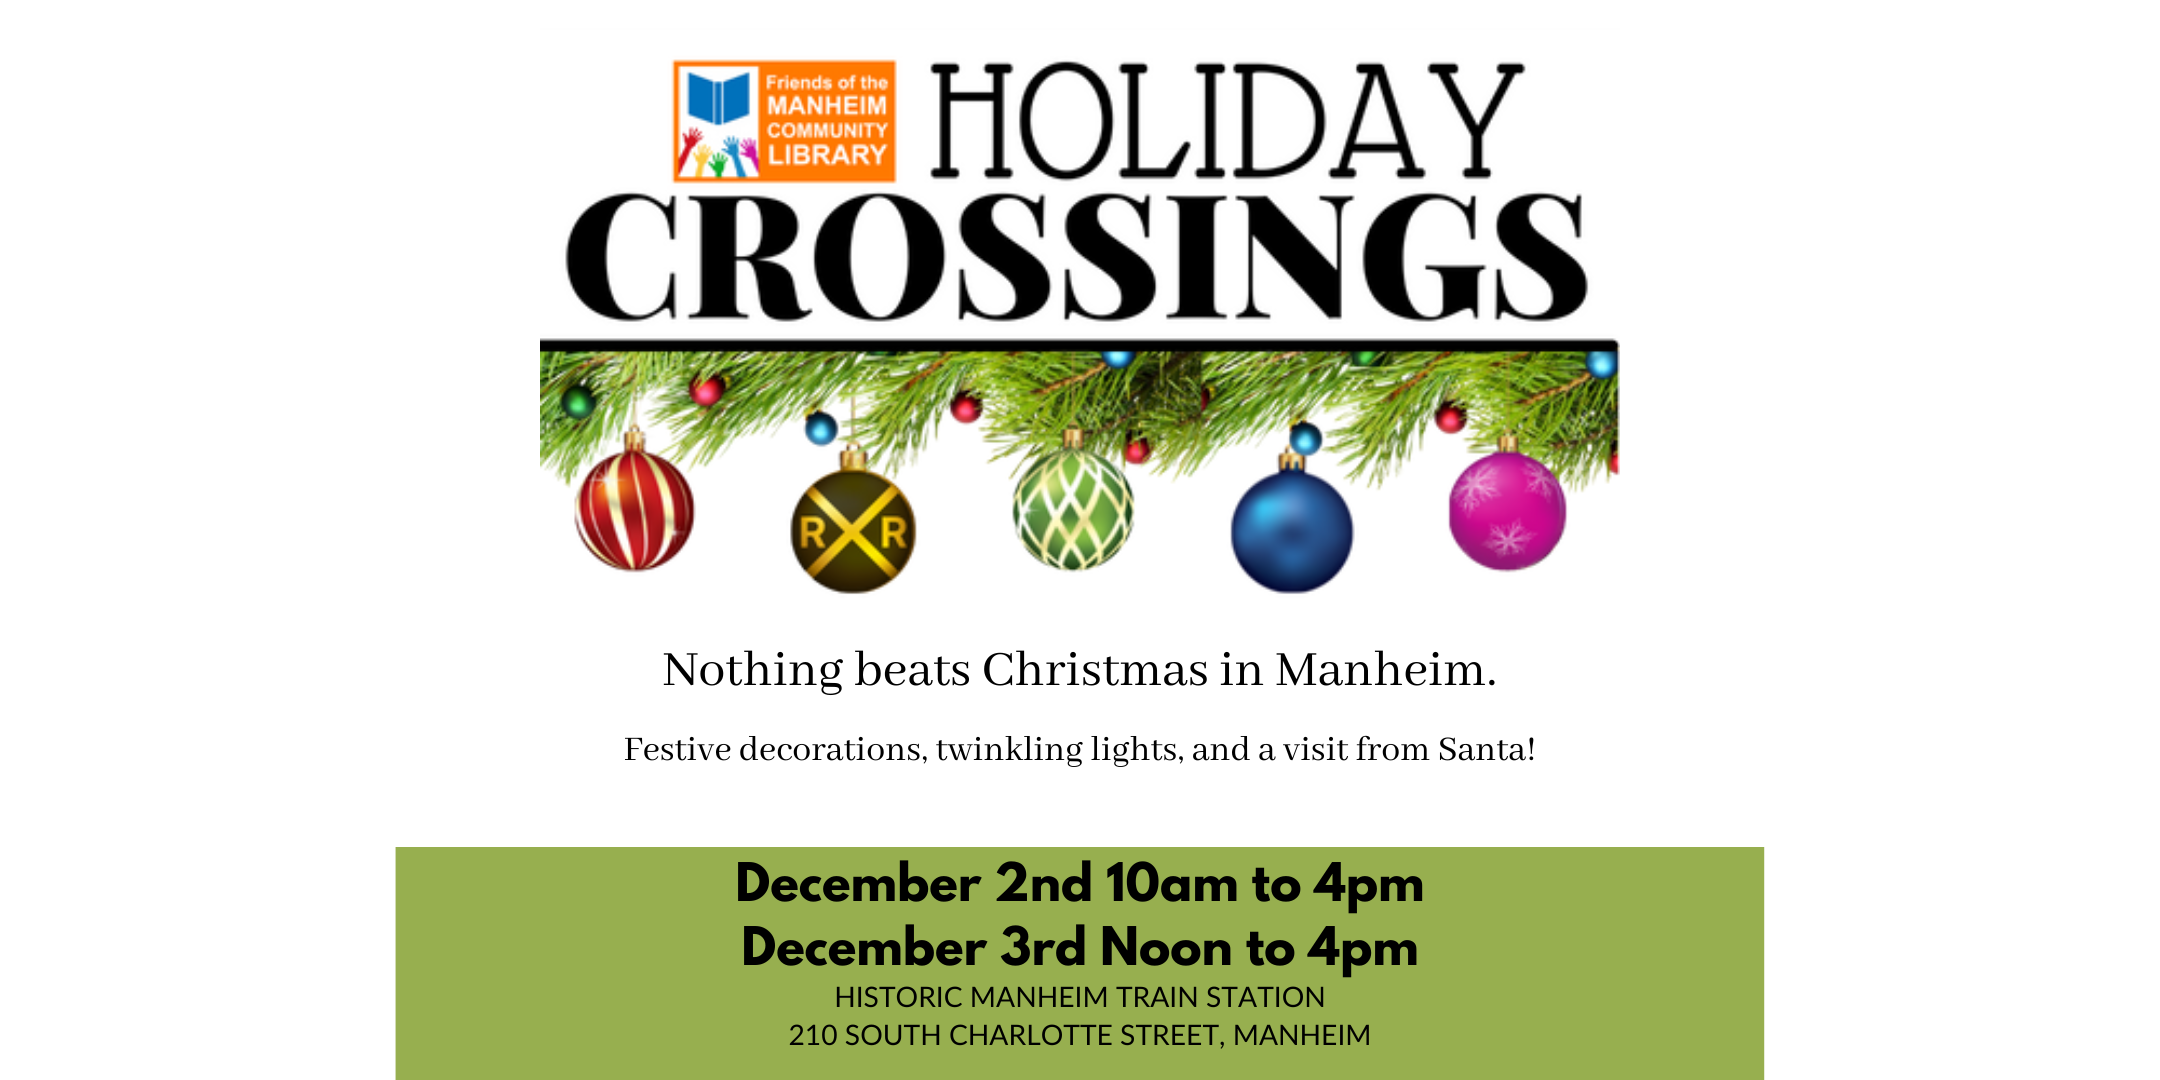 Holiday Crossings December 2 10am-4pm and December 3 12pm-4pm